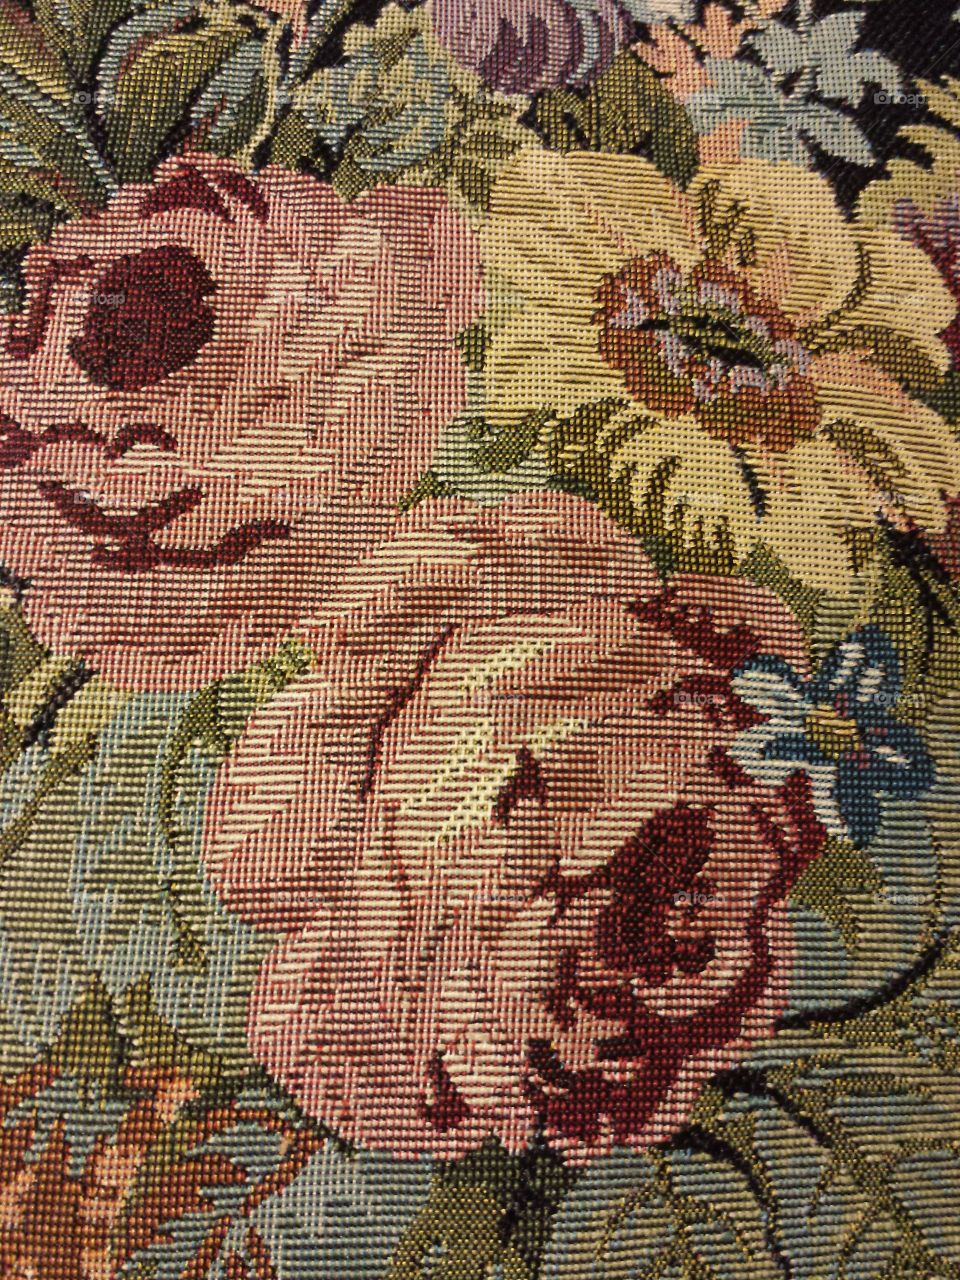 tapestry flowers